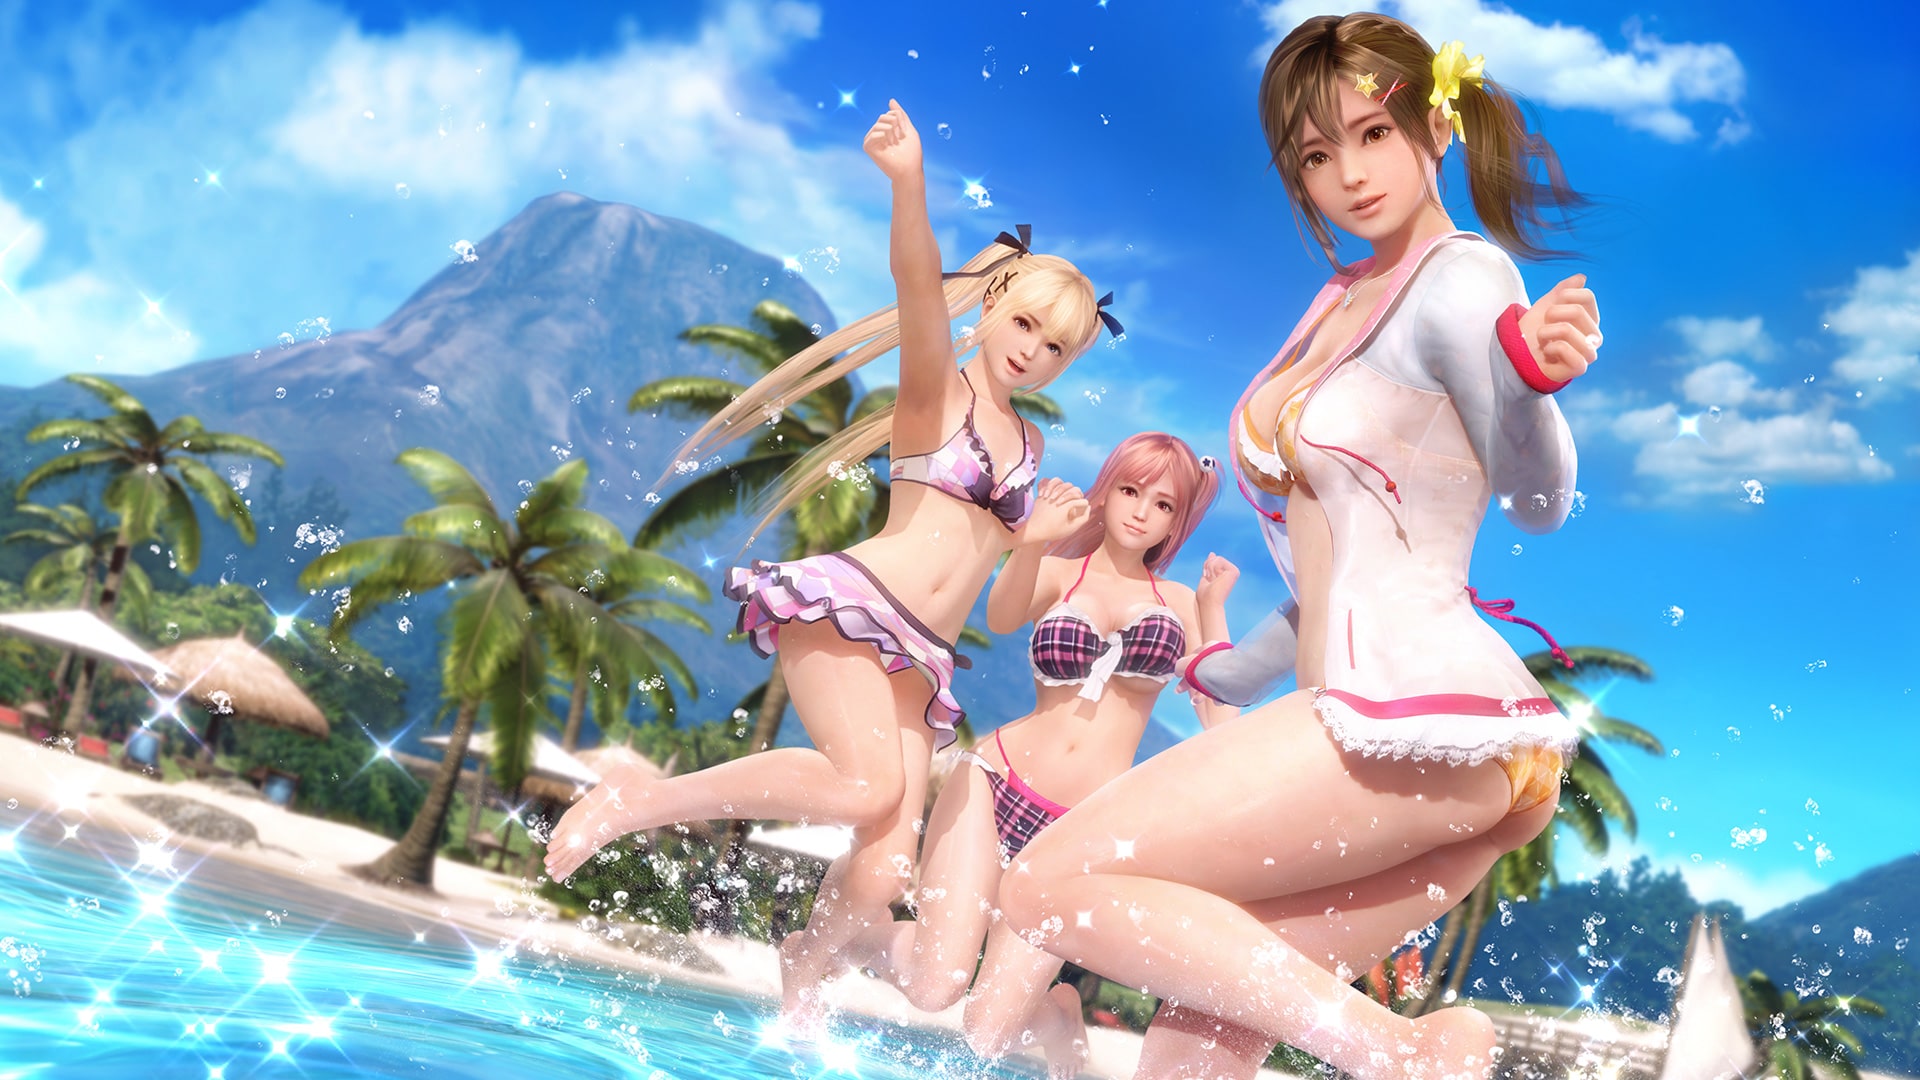 『DEAD OR ALIVE Xtreme 3 Scarlet』＆『VRパスポート』